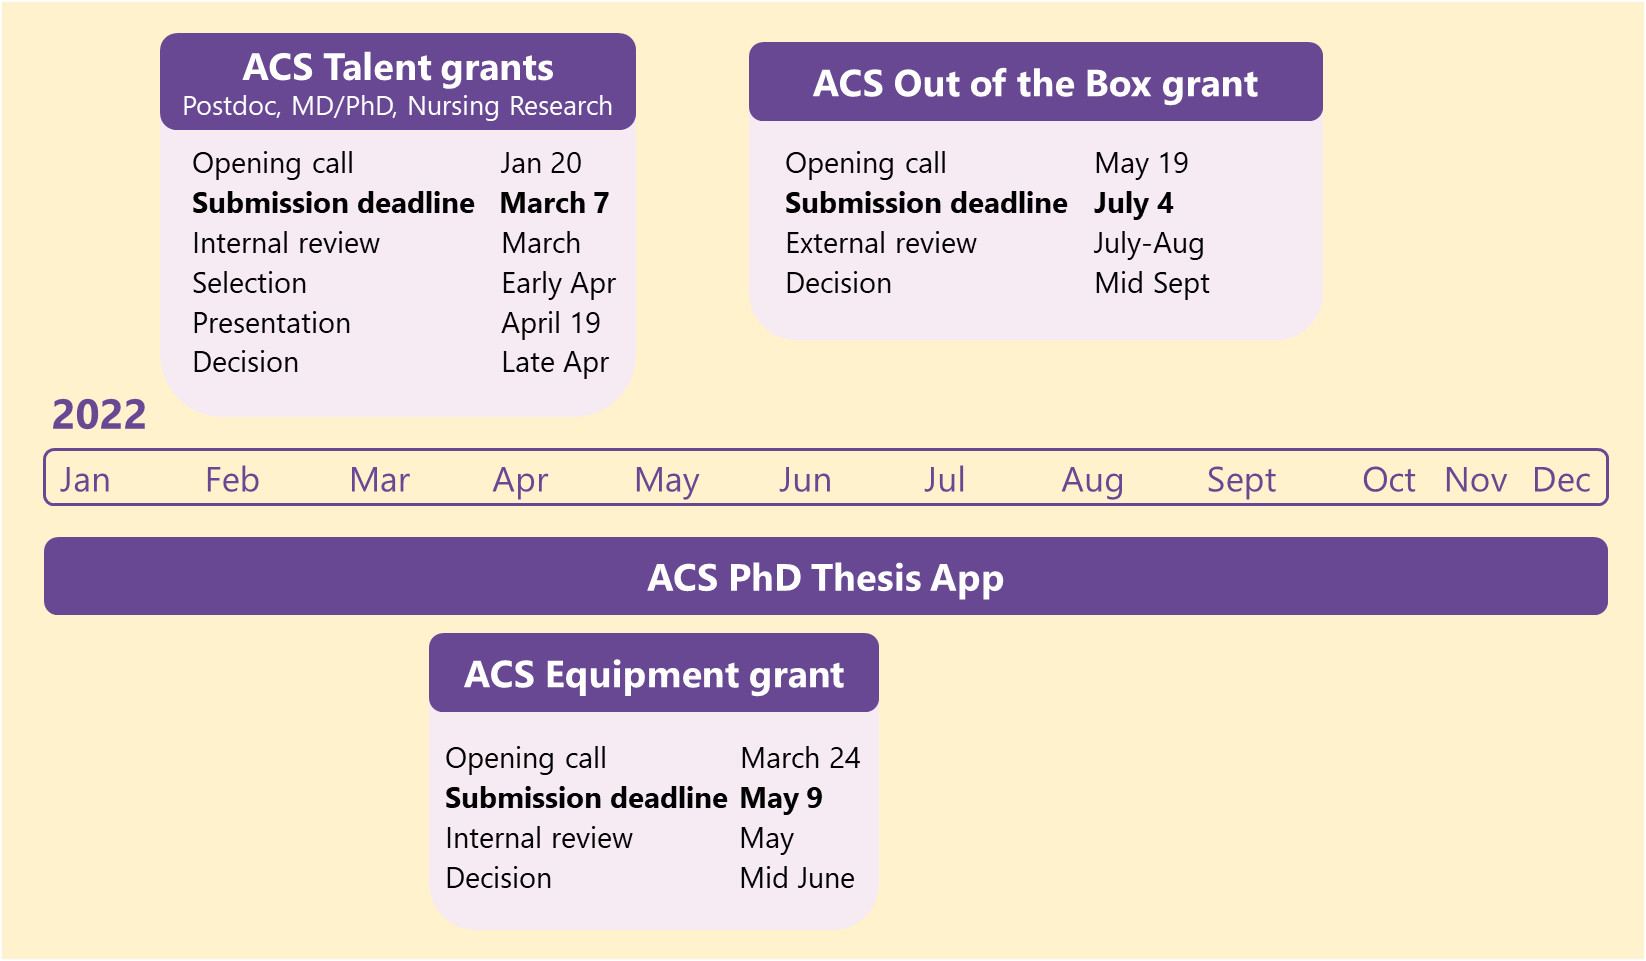 ACS grant round 2022 time line